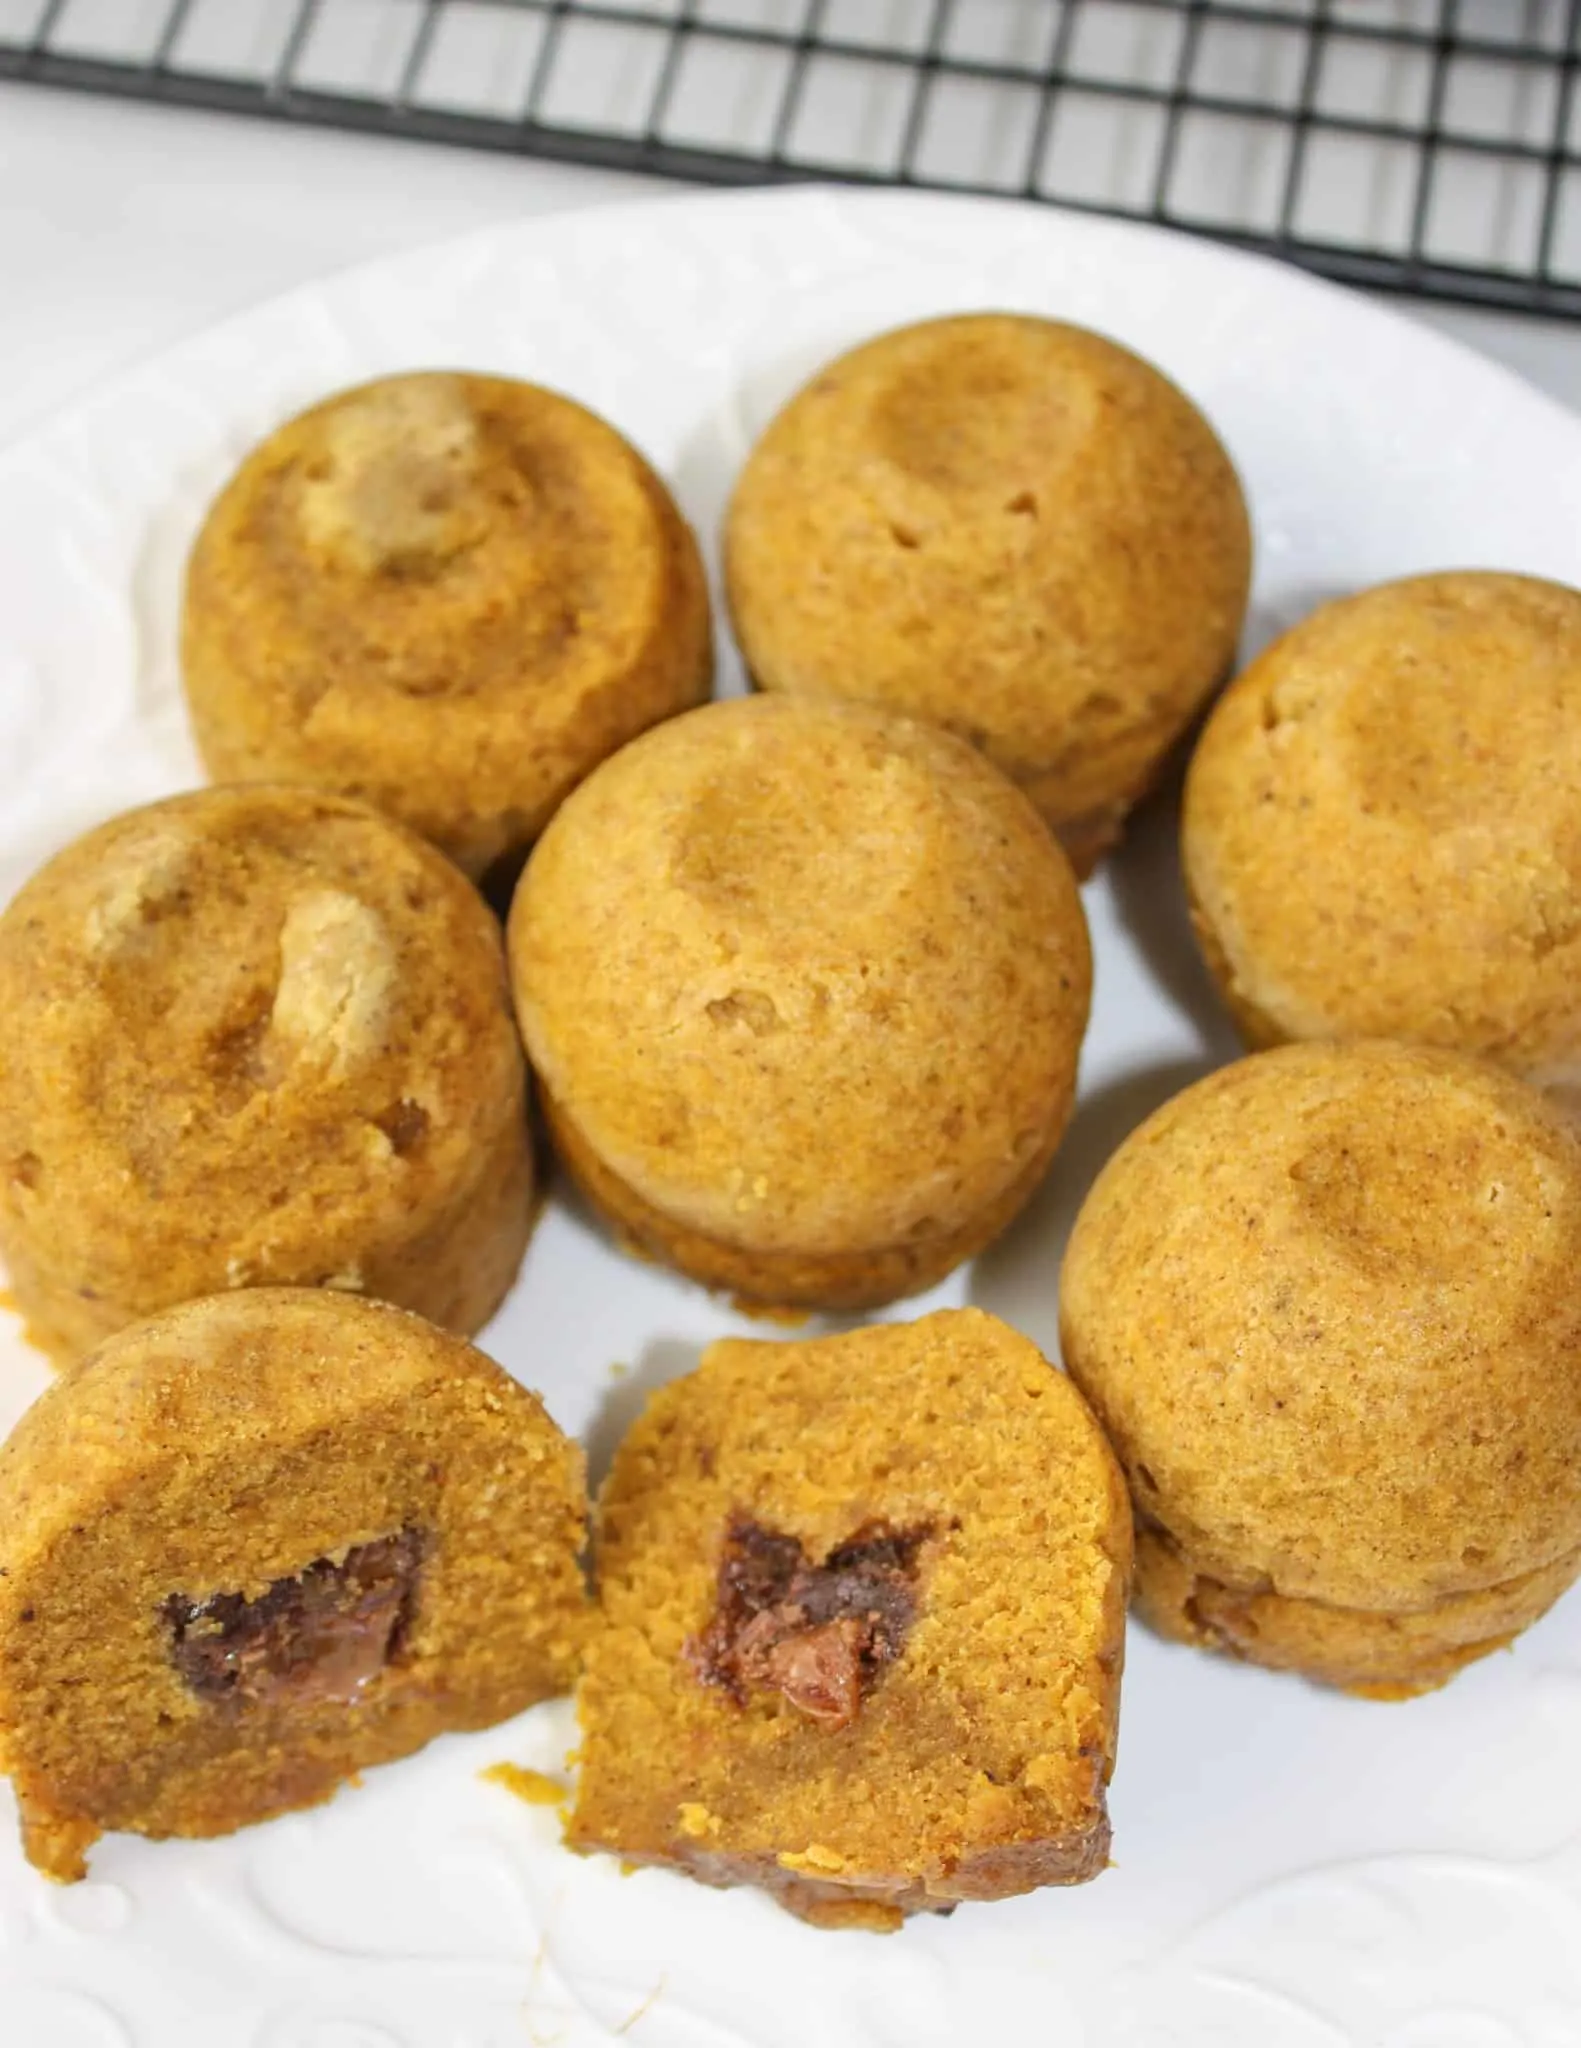 Instant Pot Pumpkin Bites are full of the flavours of fall.  This gluten free pressure cooker muffin variation, is loaded with pumpkin, spices and a surprise center if you choose that option.